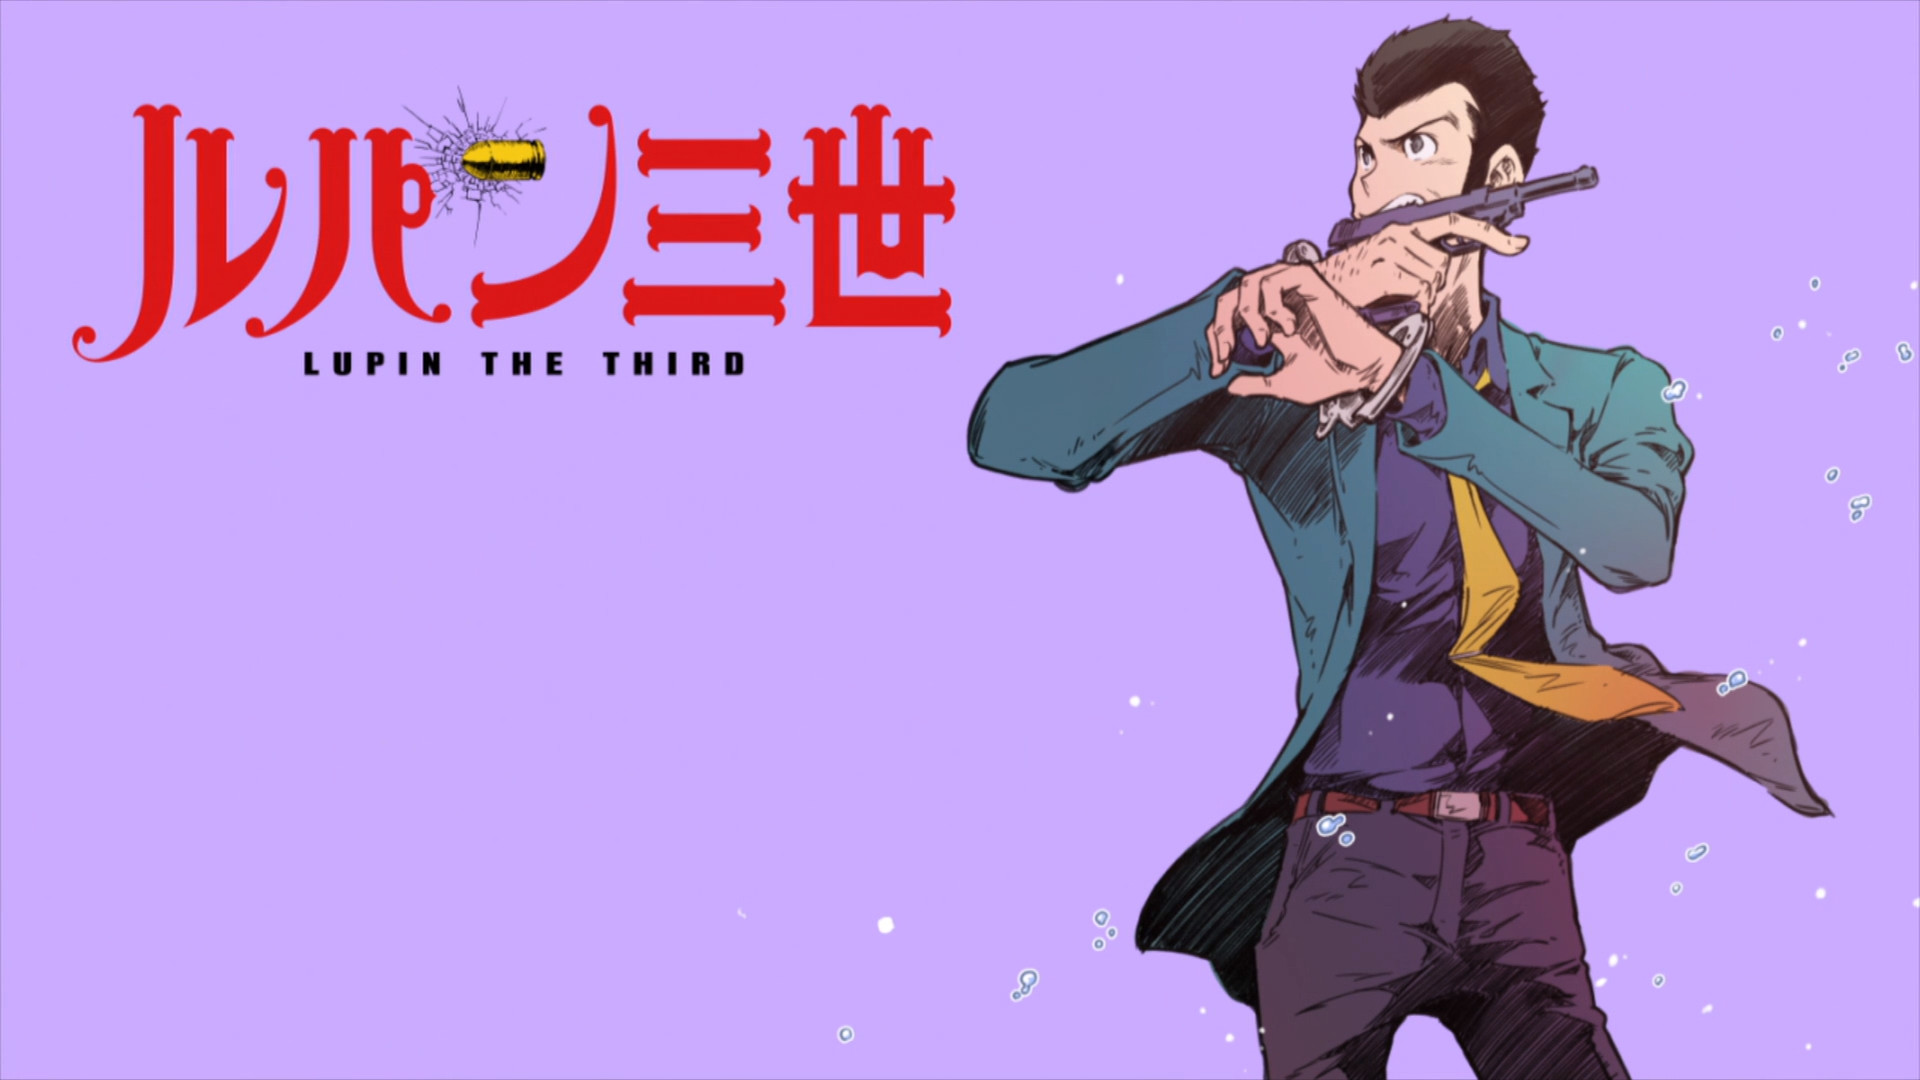 Search Results for lupin 3 wallpaper  Adorable Wallpapers  Lupin iii  Wallpaper gallery Wallpaper